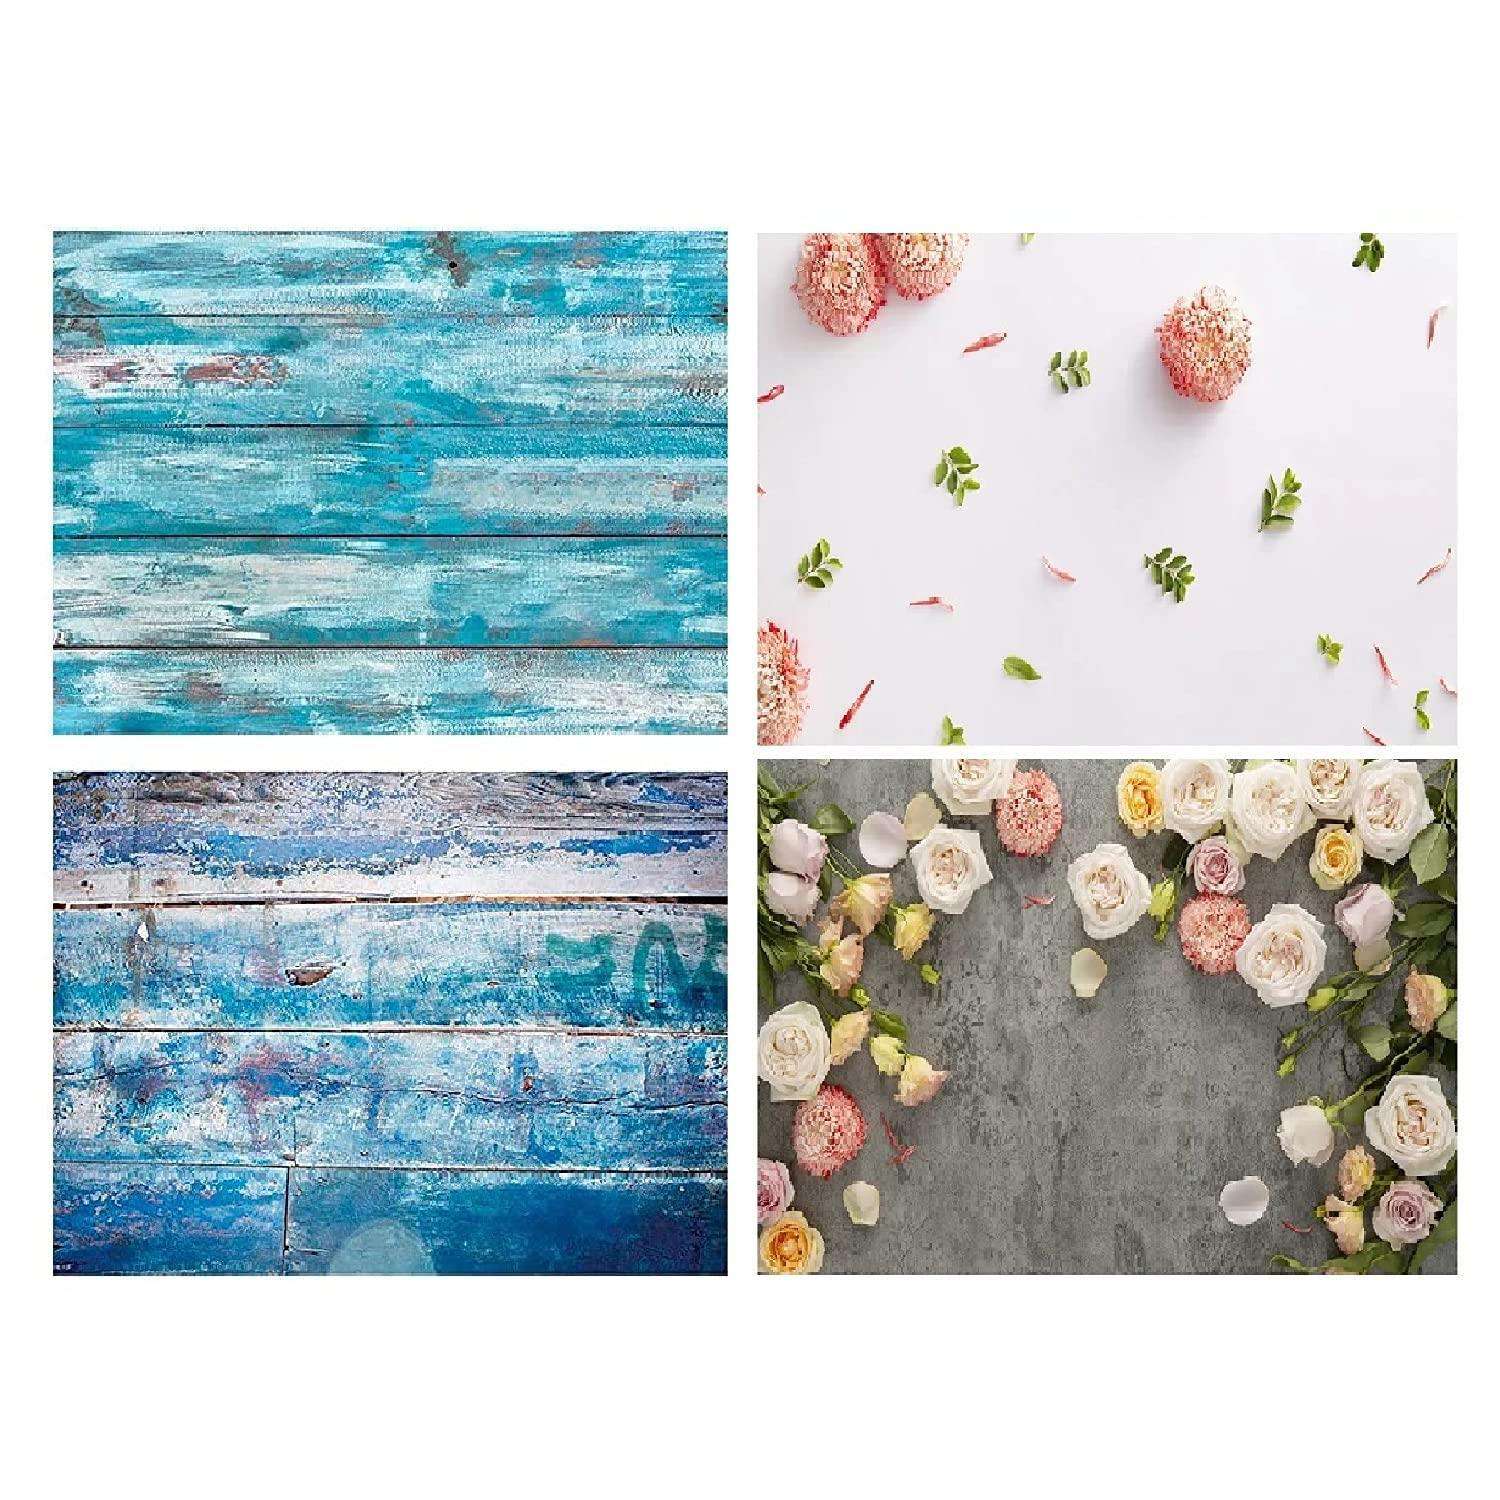 Photography Backgorunds Blue Wood and Rose Desk Pack 2 Photography Backdrop- Royalkart - The Urban Store